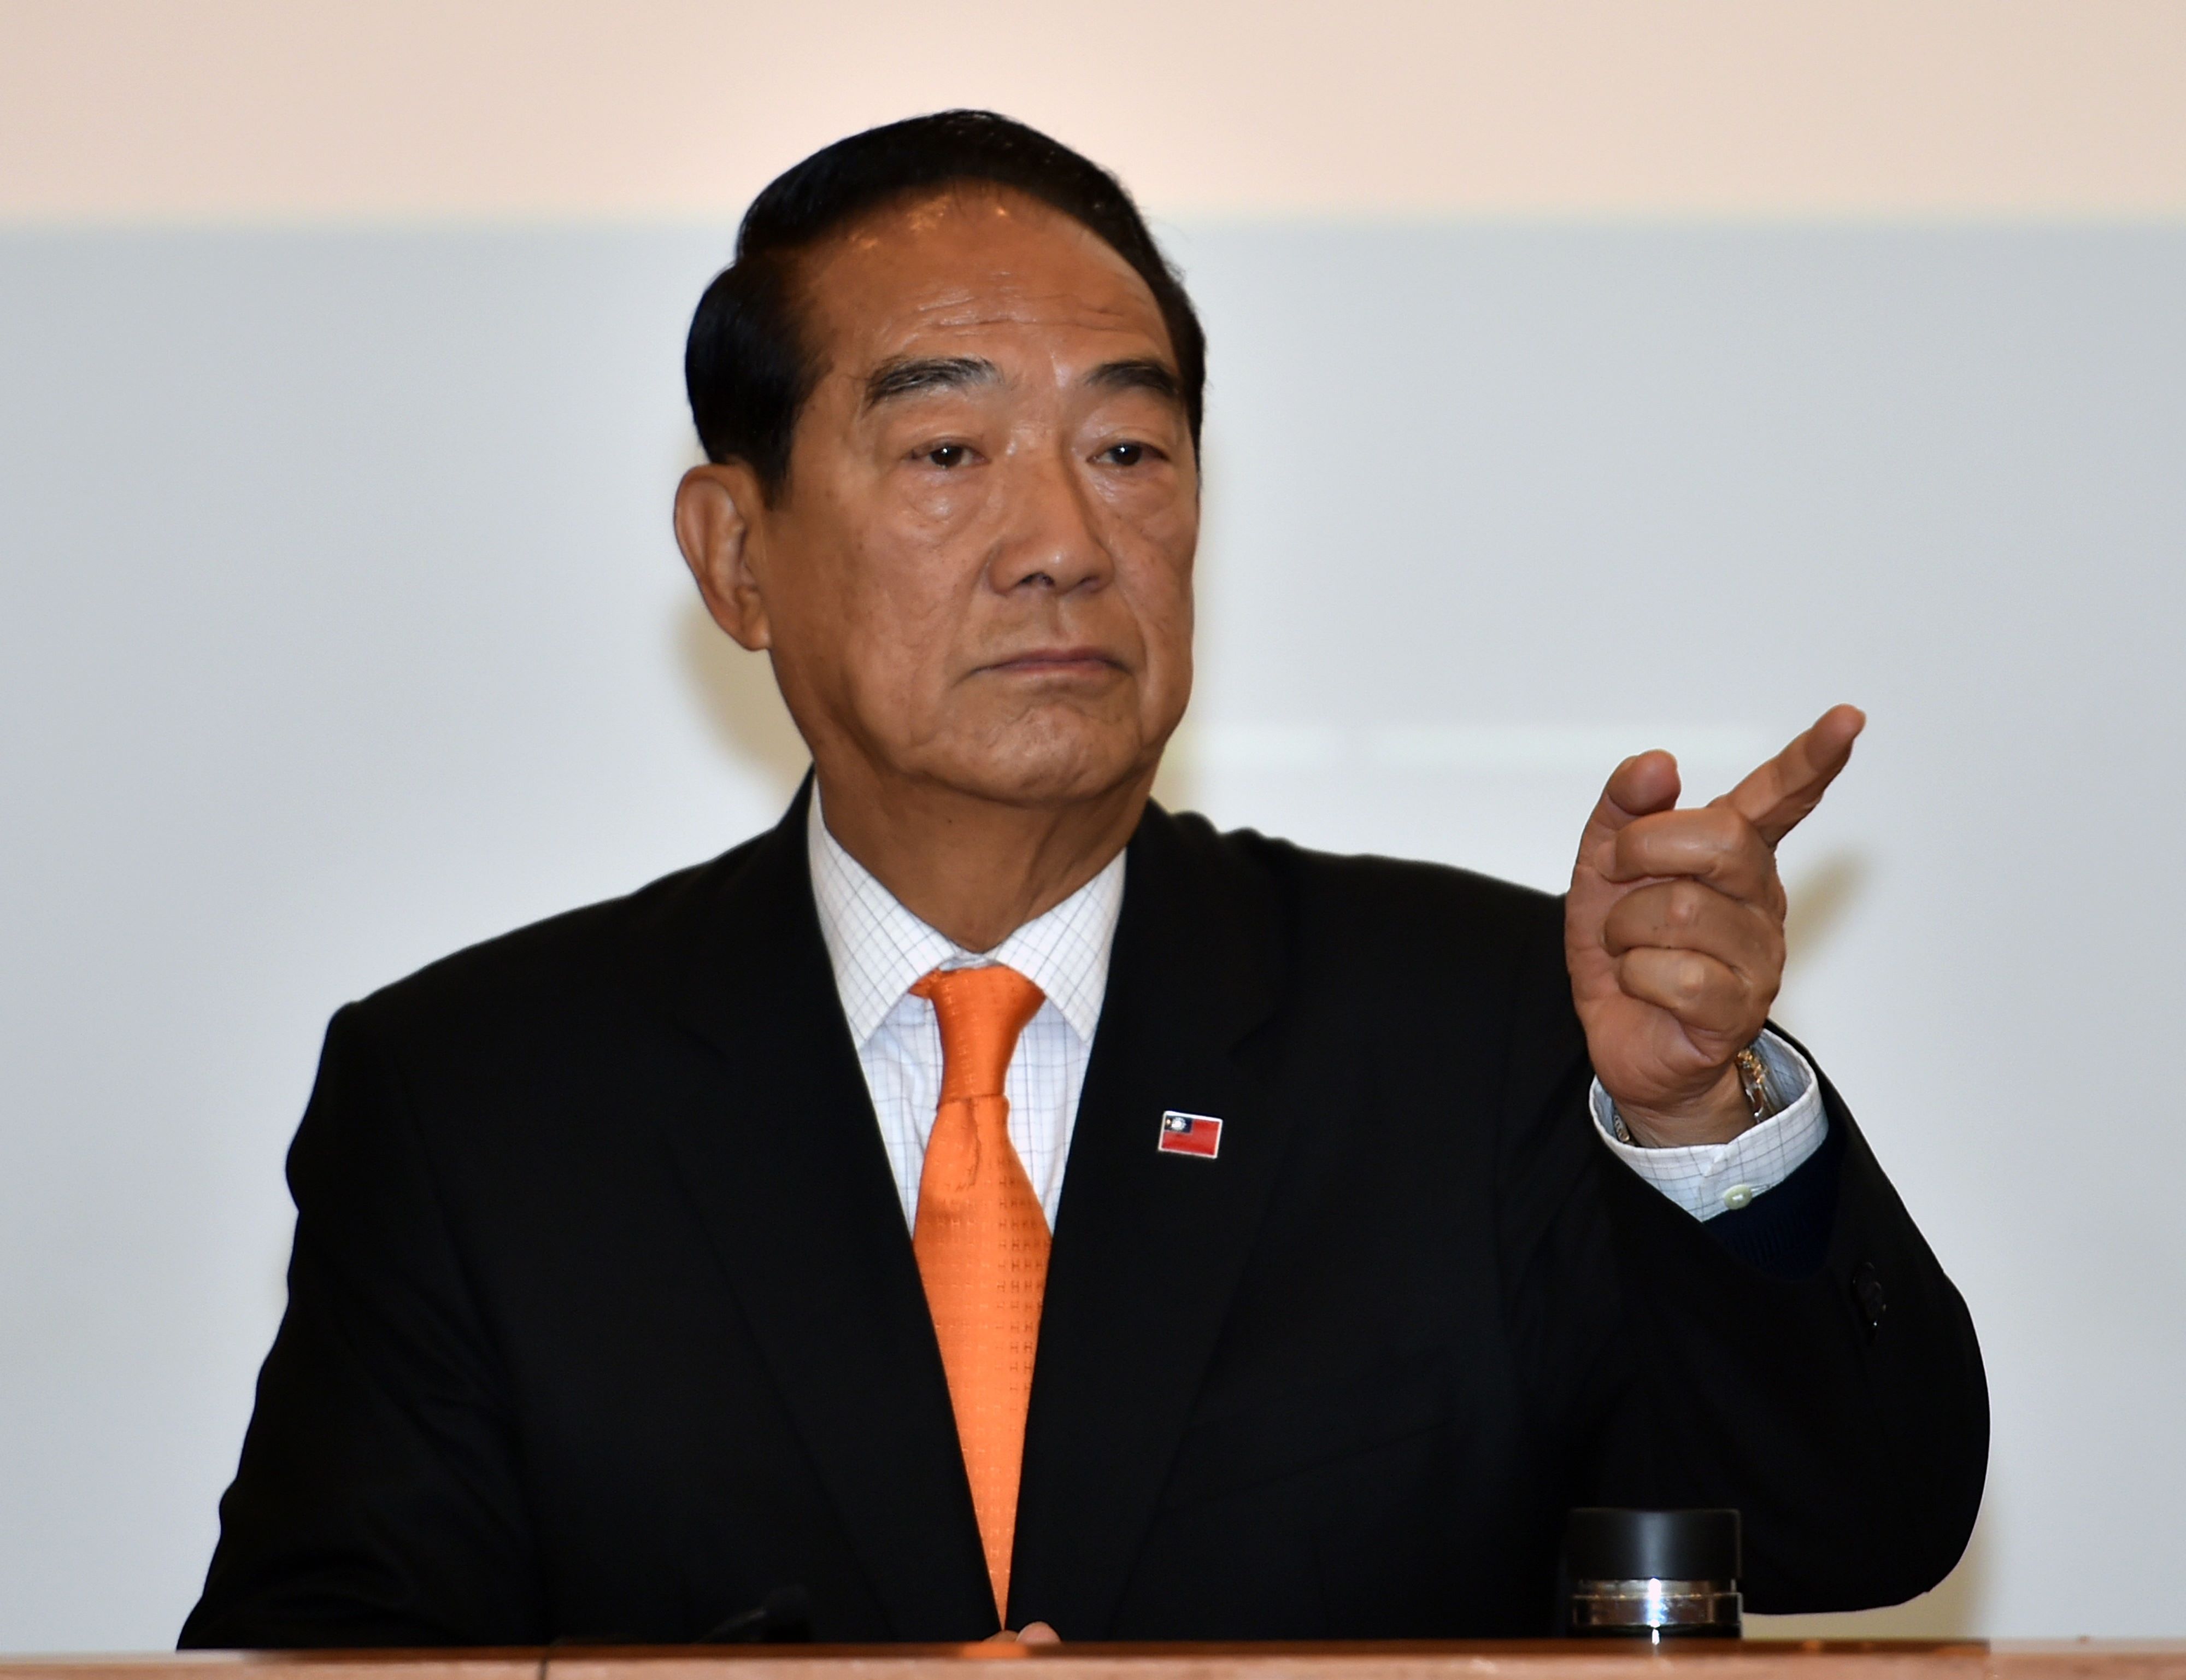 James Soong, presidential candidate from the People First Party (PFP), gestures during a press conference in Taipei on January 12, 2016. Fraught relations between Taiwan and China are at a crossroads once more as frustrated voters are expected to bring in the Beijing-skeptic opposition at presidential elections Saturday. AFP PHOTO / Sam Yeh